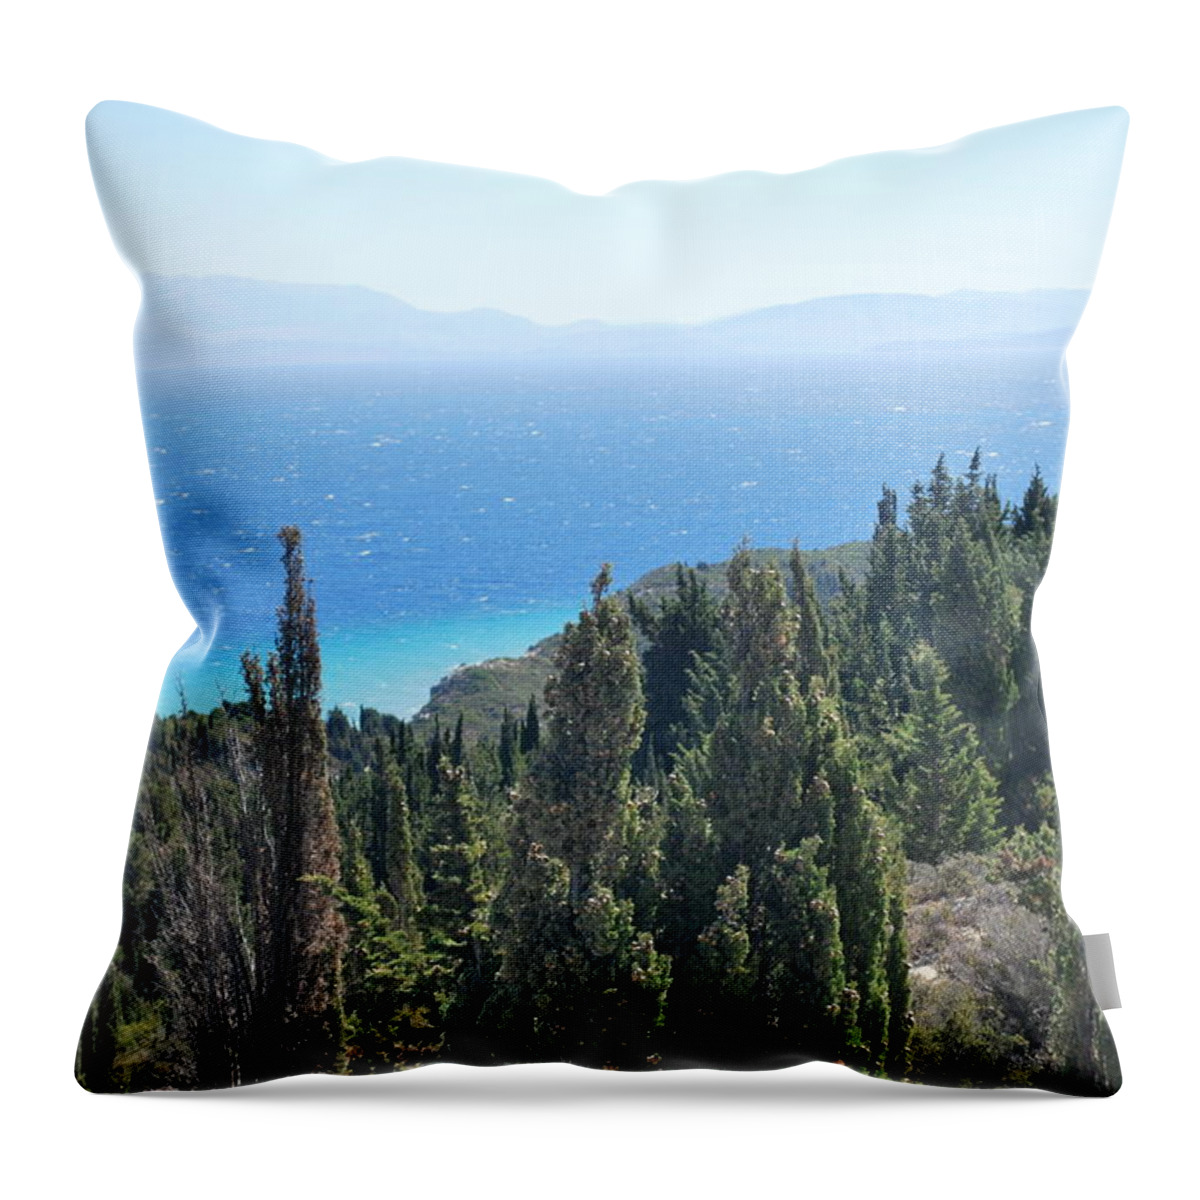  Throw Pillow featuring the photograph Cypress 2 by George Katechis